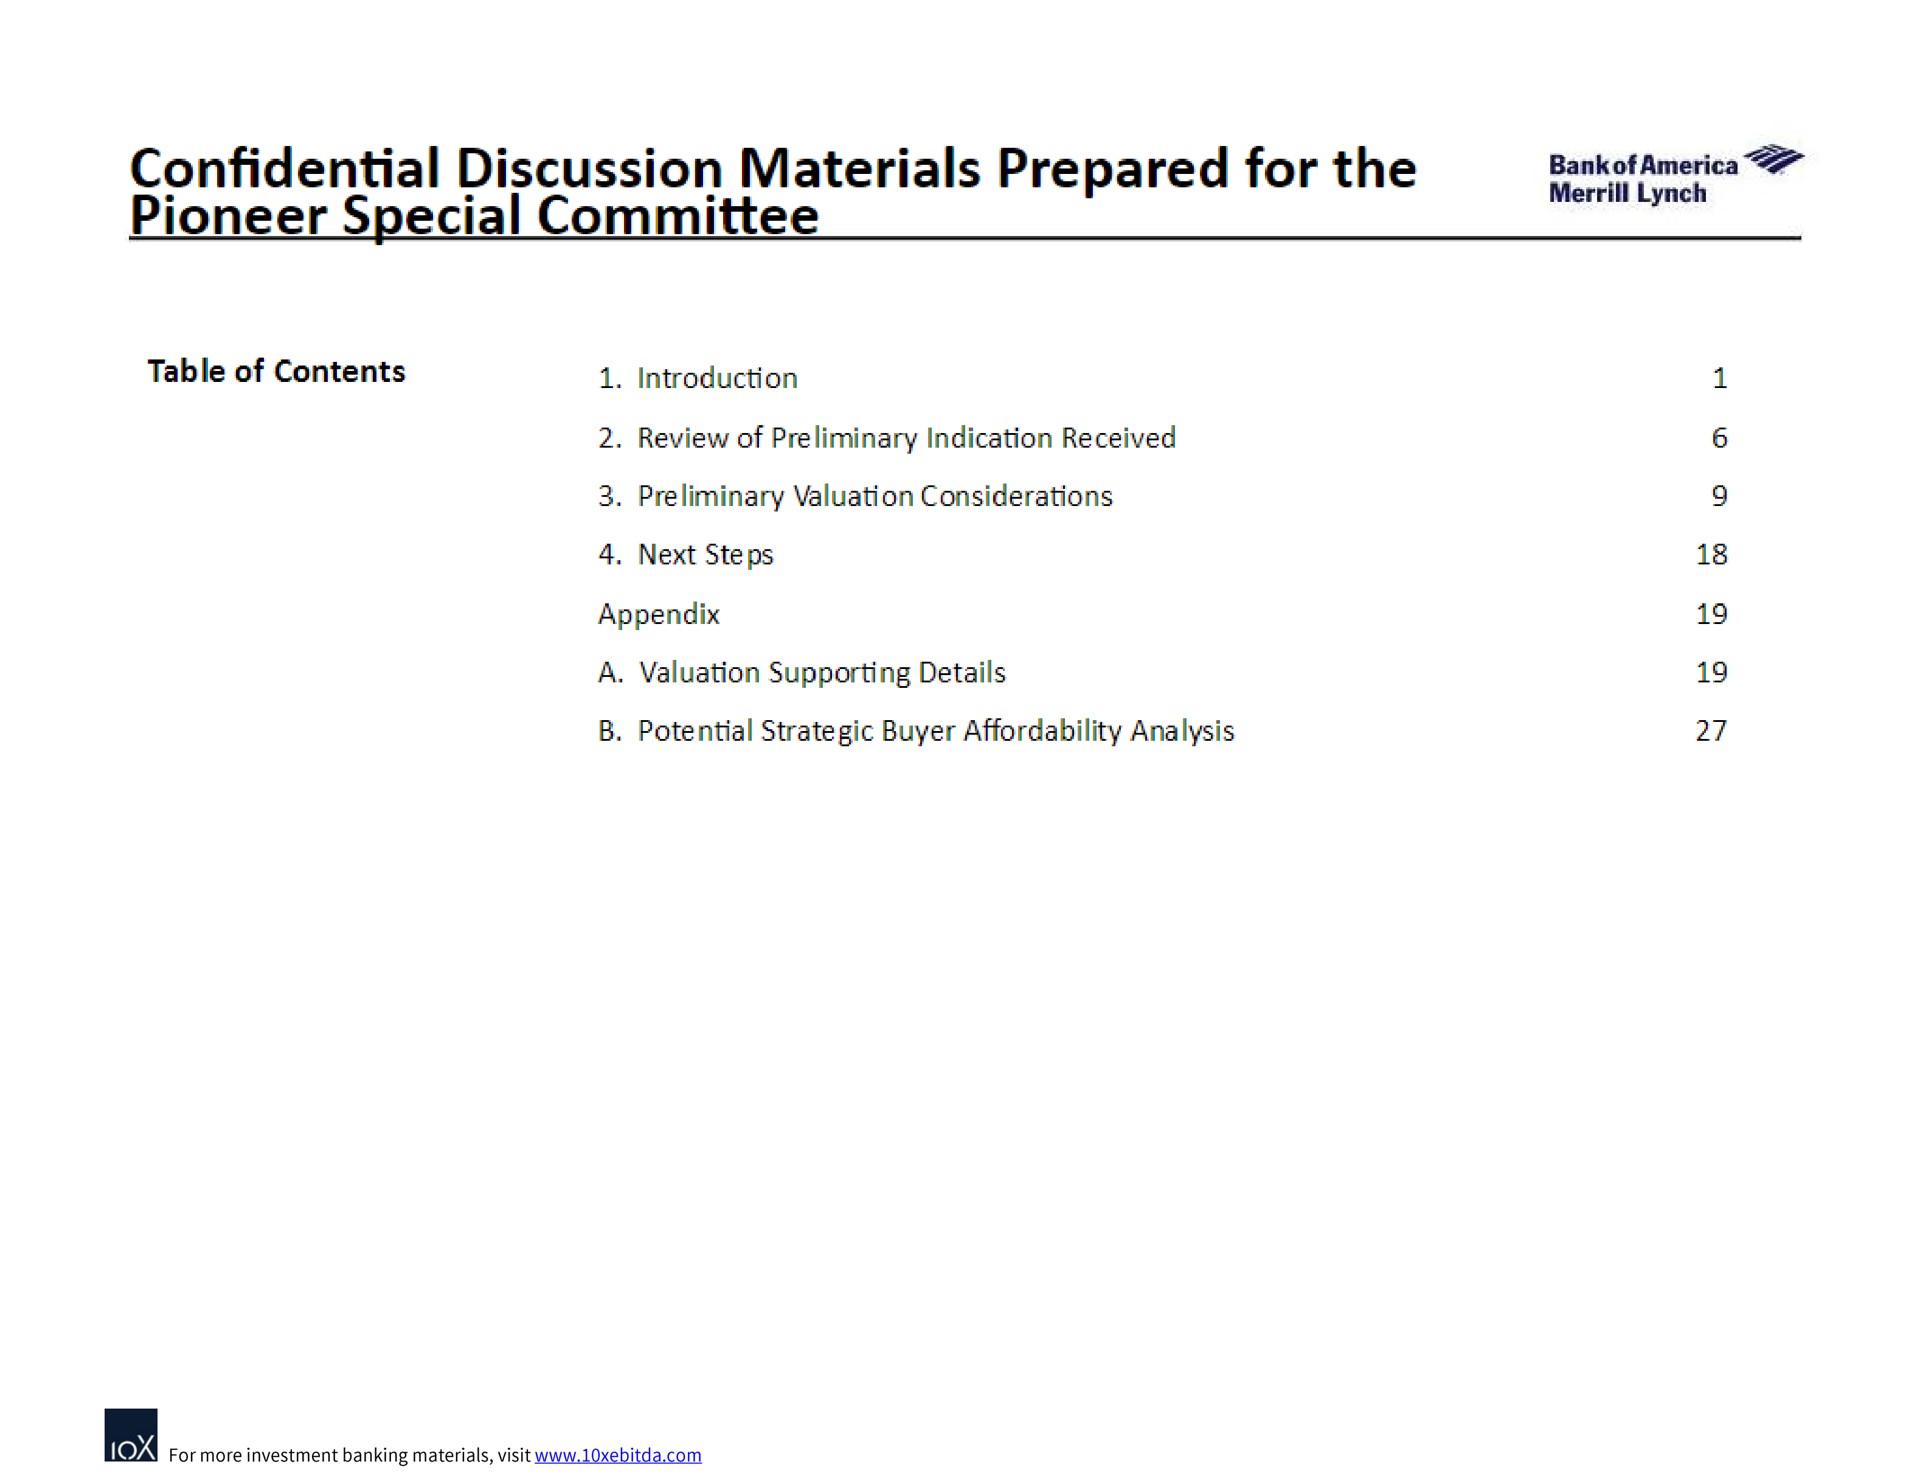 confidential discussion materials prepared for the pioneer special committee | Bank of America